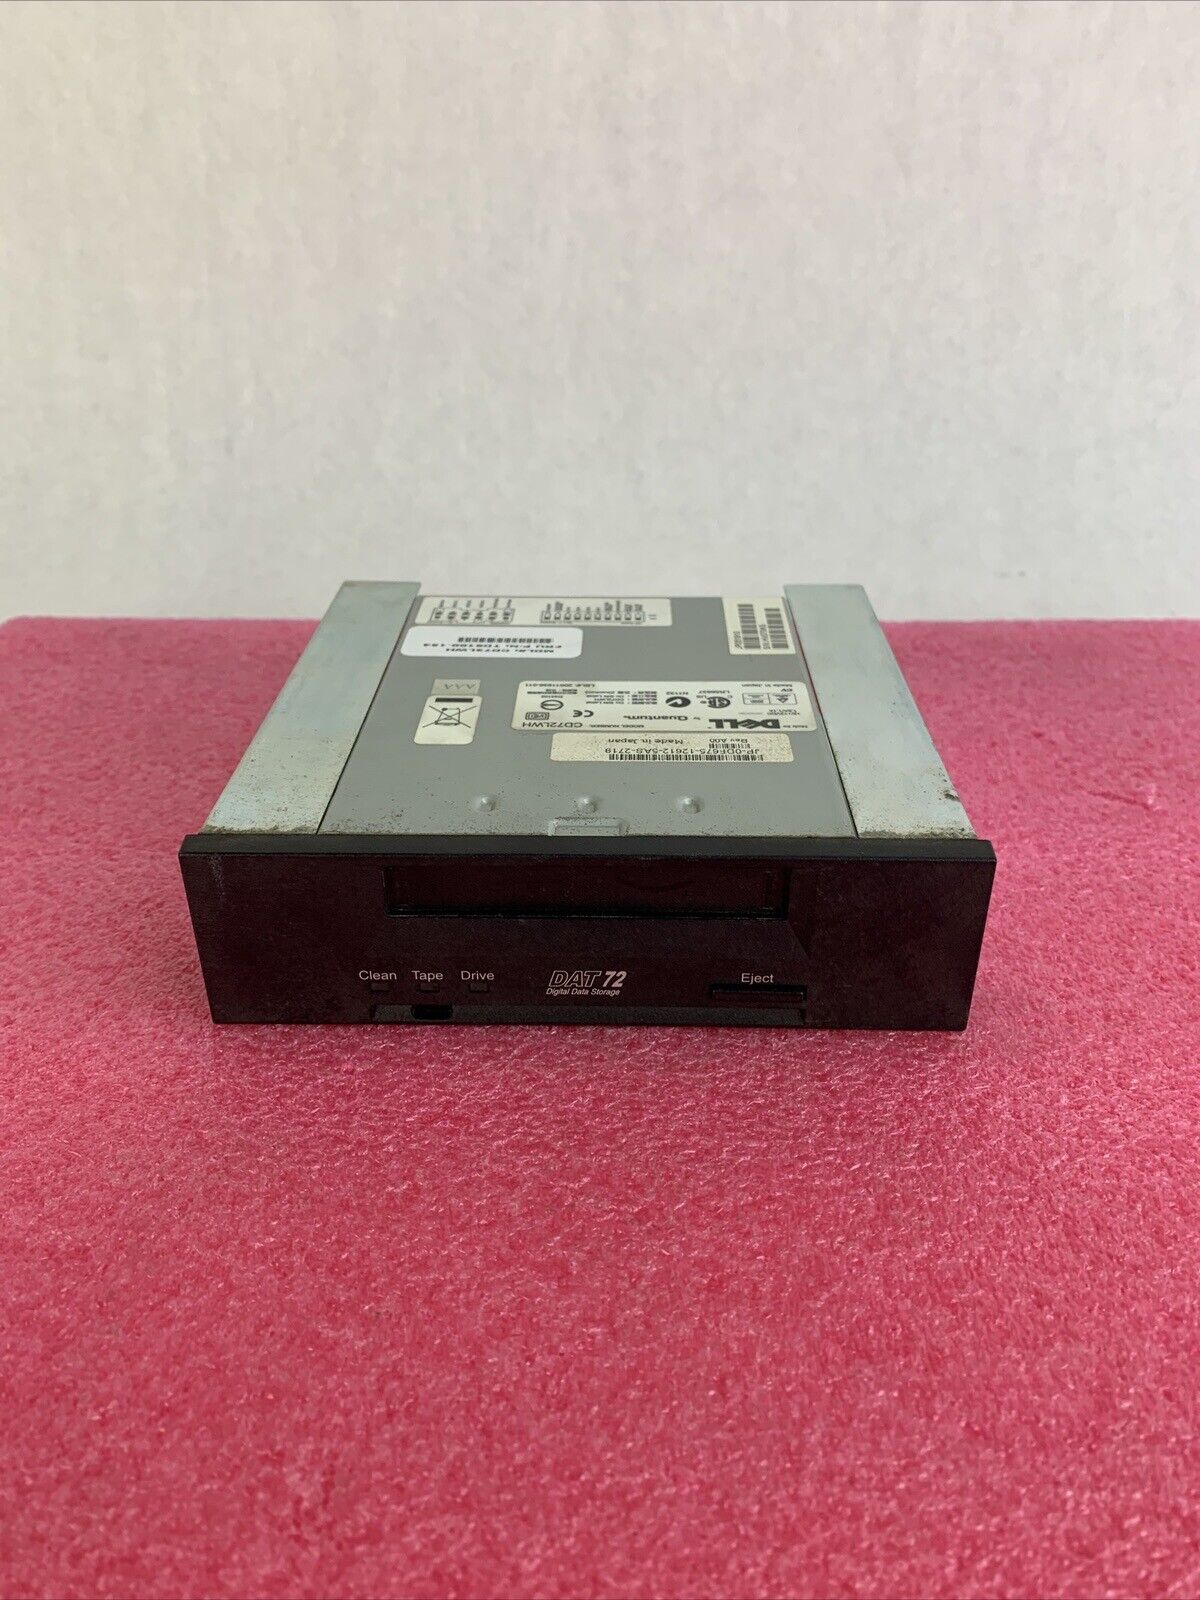 DELL PC353 DAT72 36/72GB INTERNAL SCSI 68 PIN DDS5 TAPE DRIVE CD72LWH